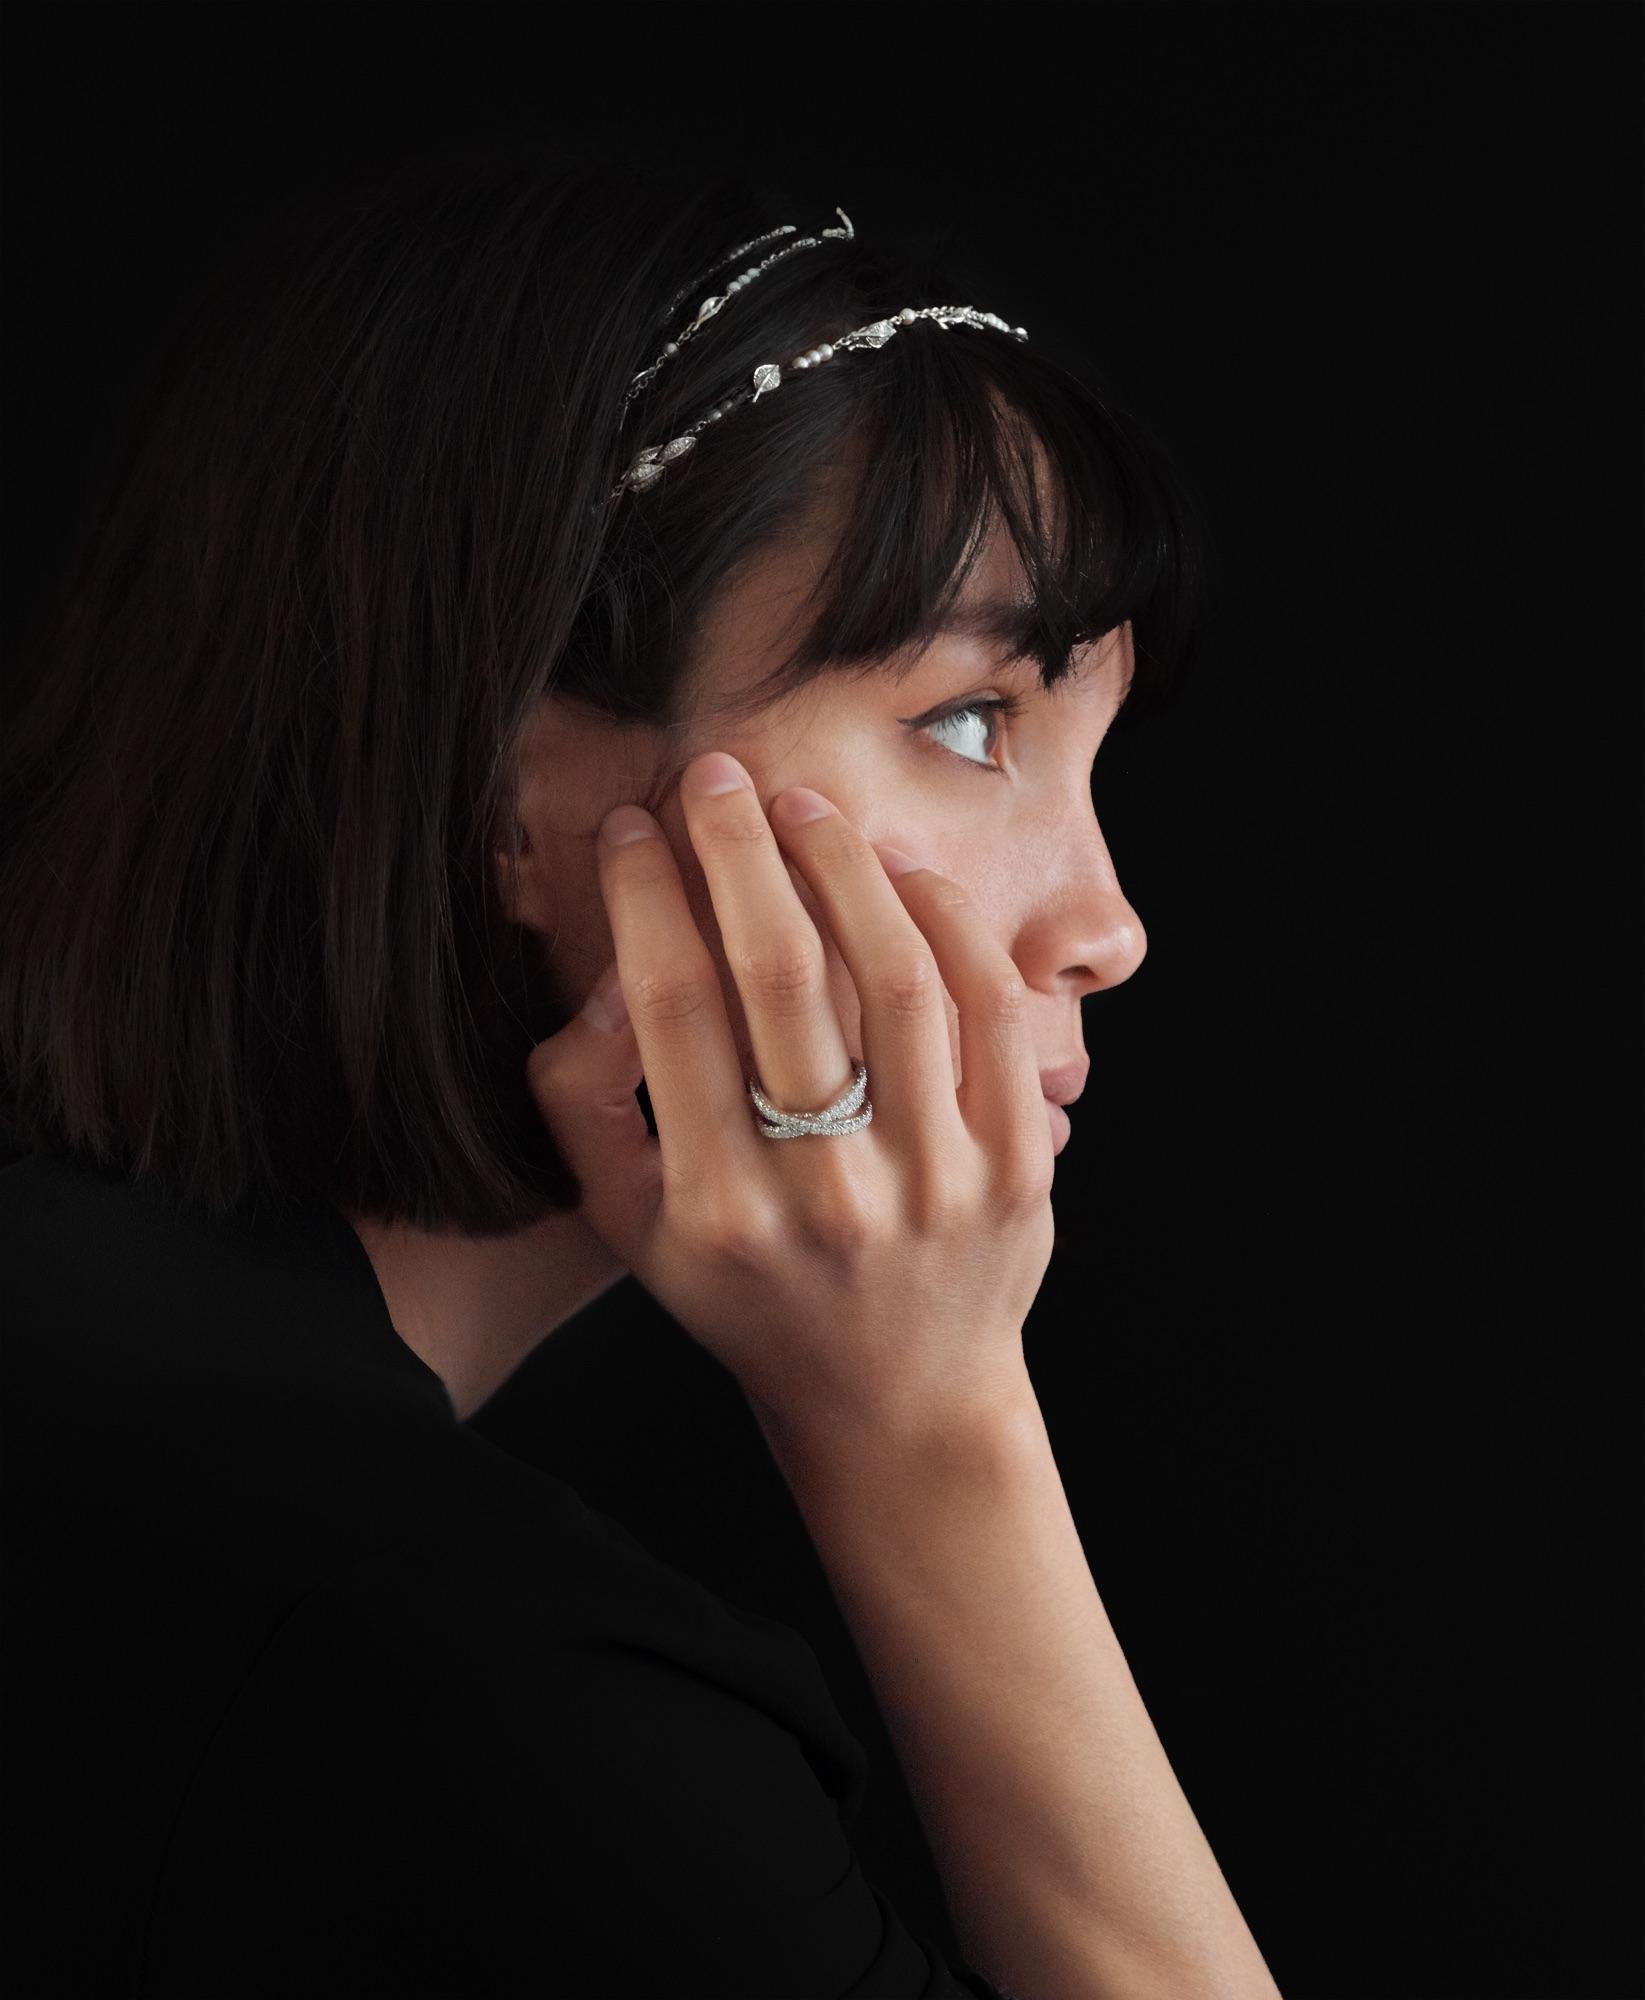 Handcrafted in France in our High Jewelry Paris workshop. Designed by Édéenne, artist and founder of Maison Édéenne, this “Two makes Three” ring is transformable. It consists of two 18K white gold rings that can be worn alone or together, depending